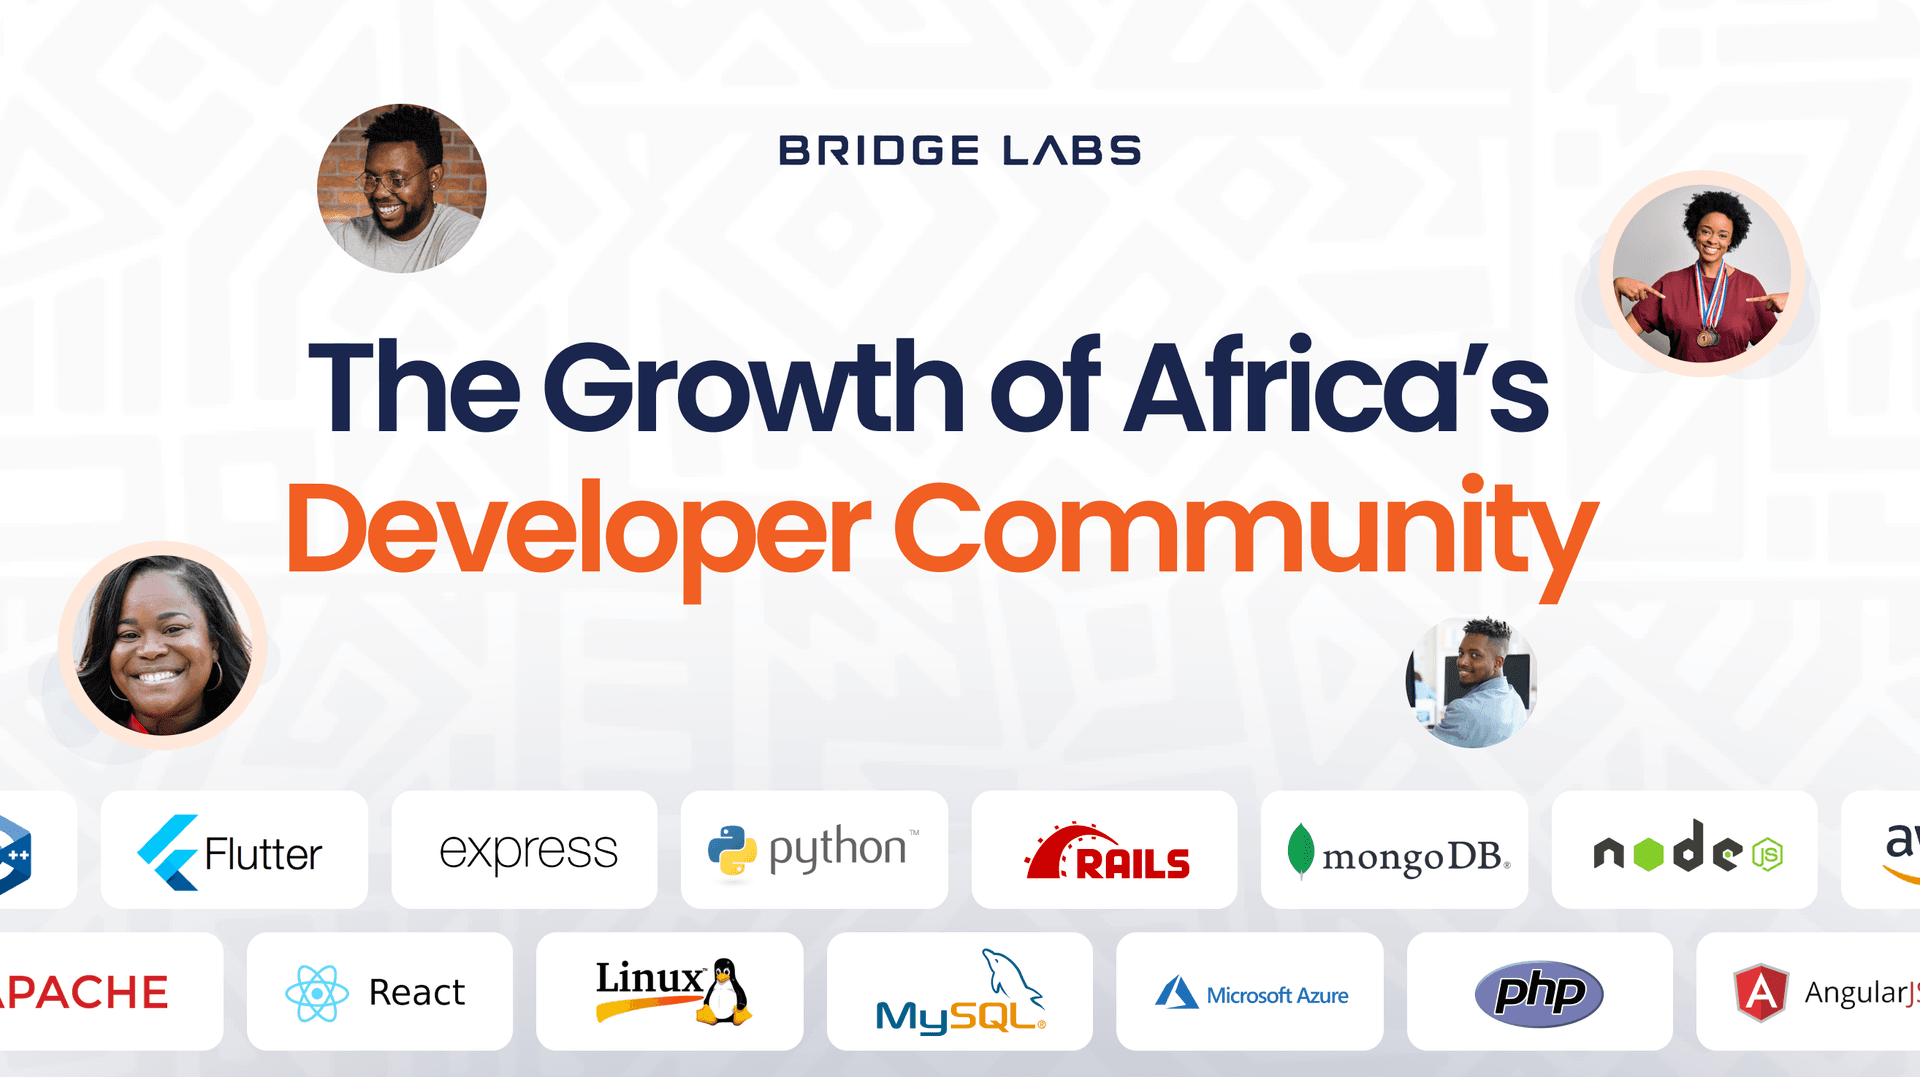 The Growth of Africa’s Developer Community